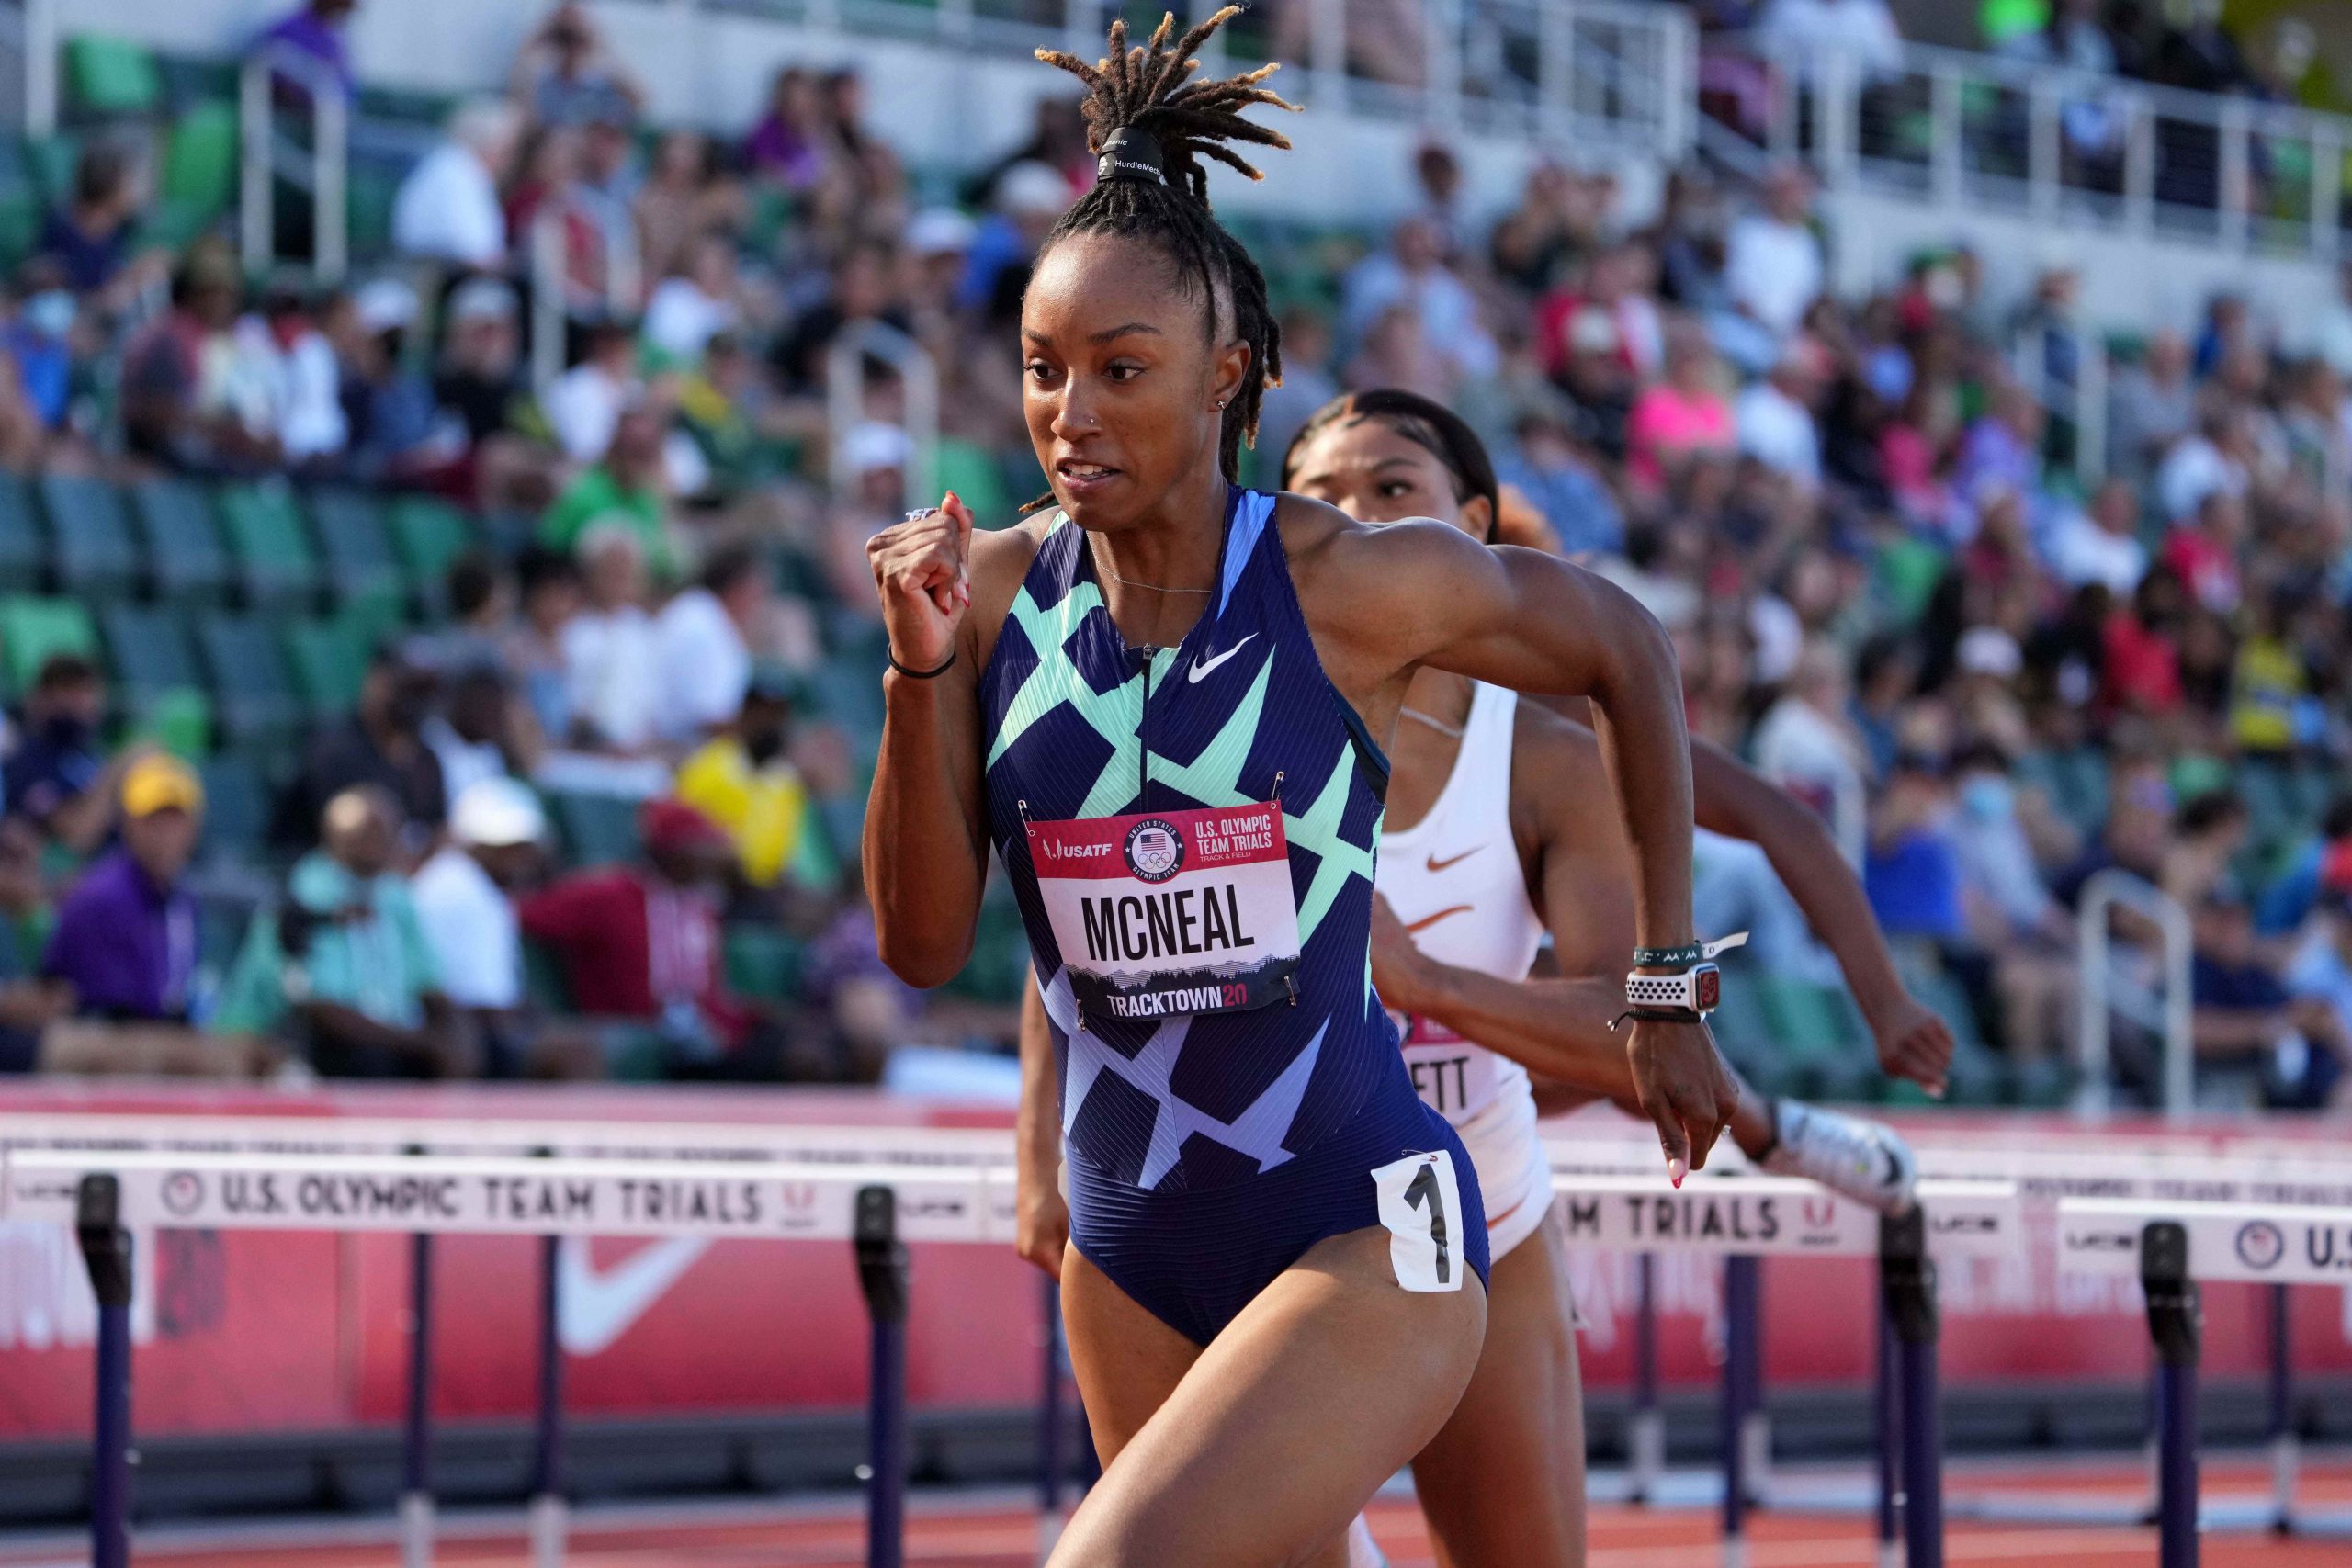 Track & Field: USA Olympic Team Trials Jun 19, 2021; Eugene, OR, USA; Brianna McNeal aka Brianna Rollins wins womens 100m hurdles heat in 12.50  during the US Olympic Team Trials at Hayward Field. Mandatory Credit: Kirby Lee-USA TODAY Sports Kirby Lee